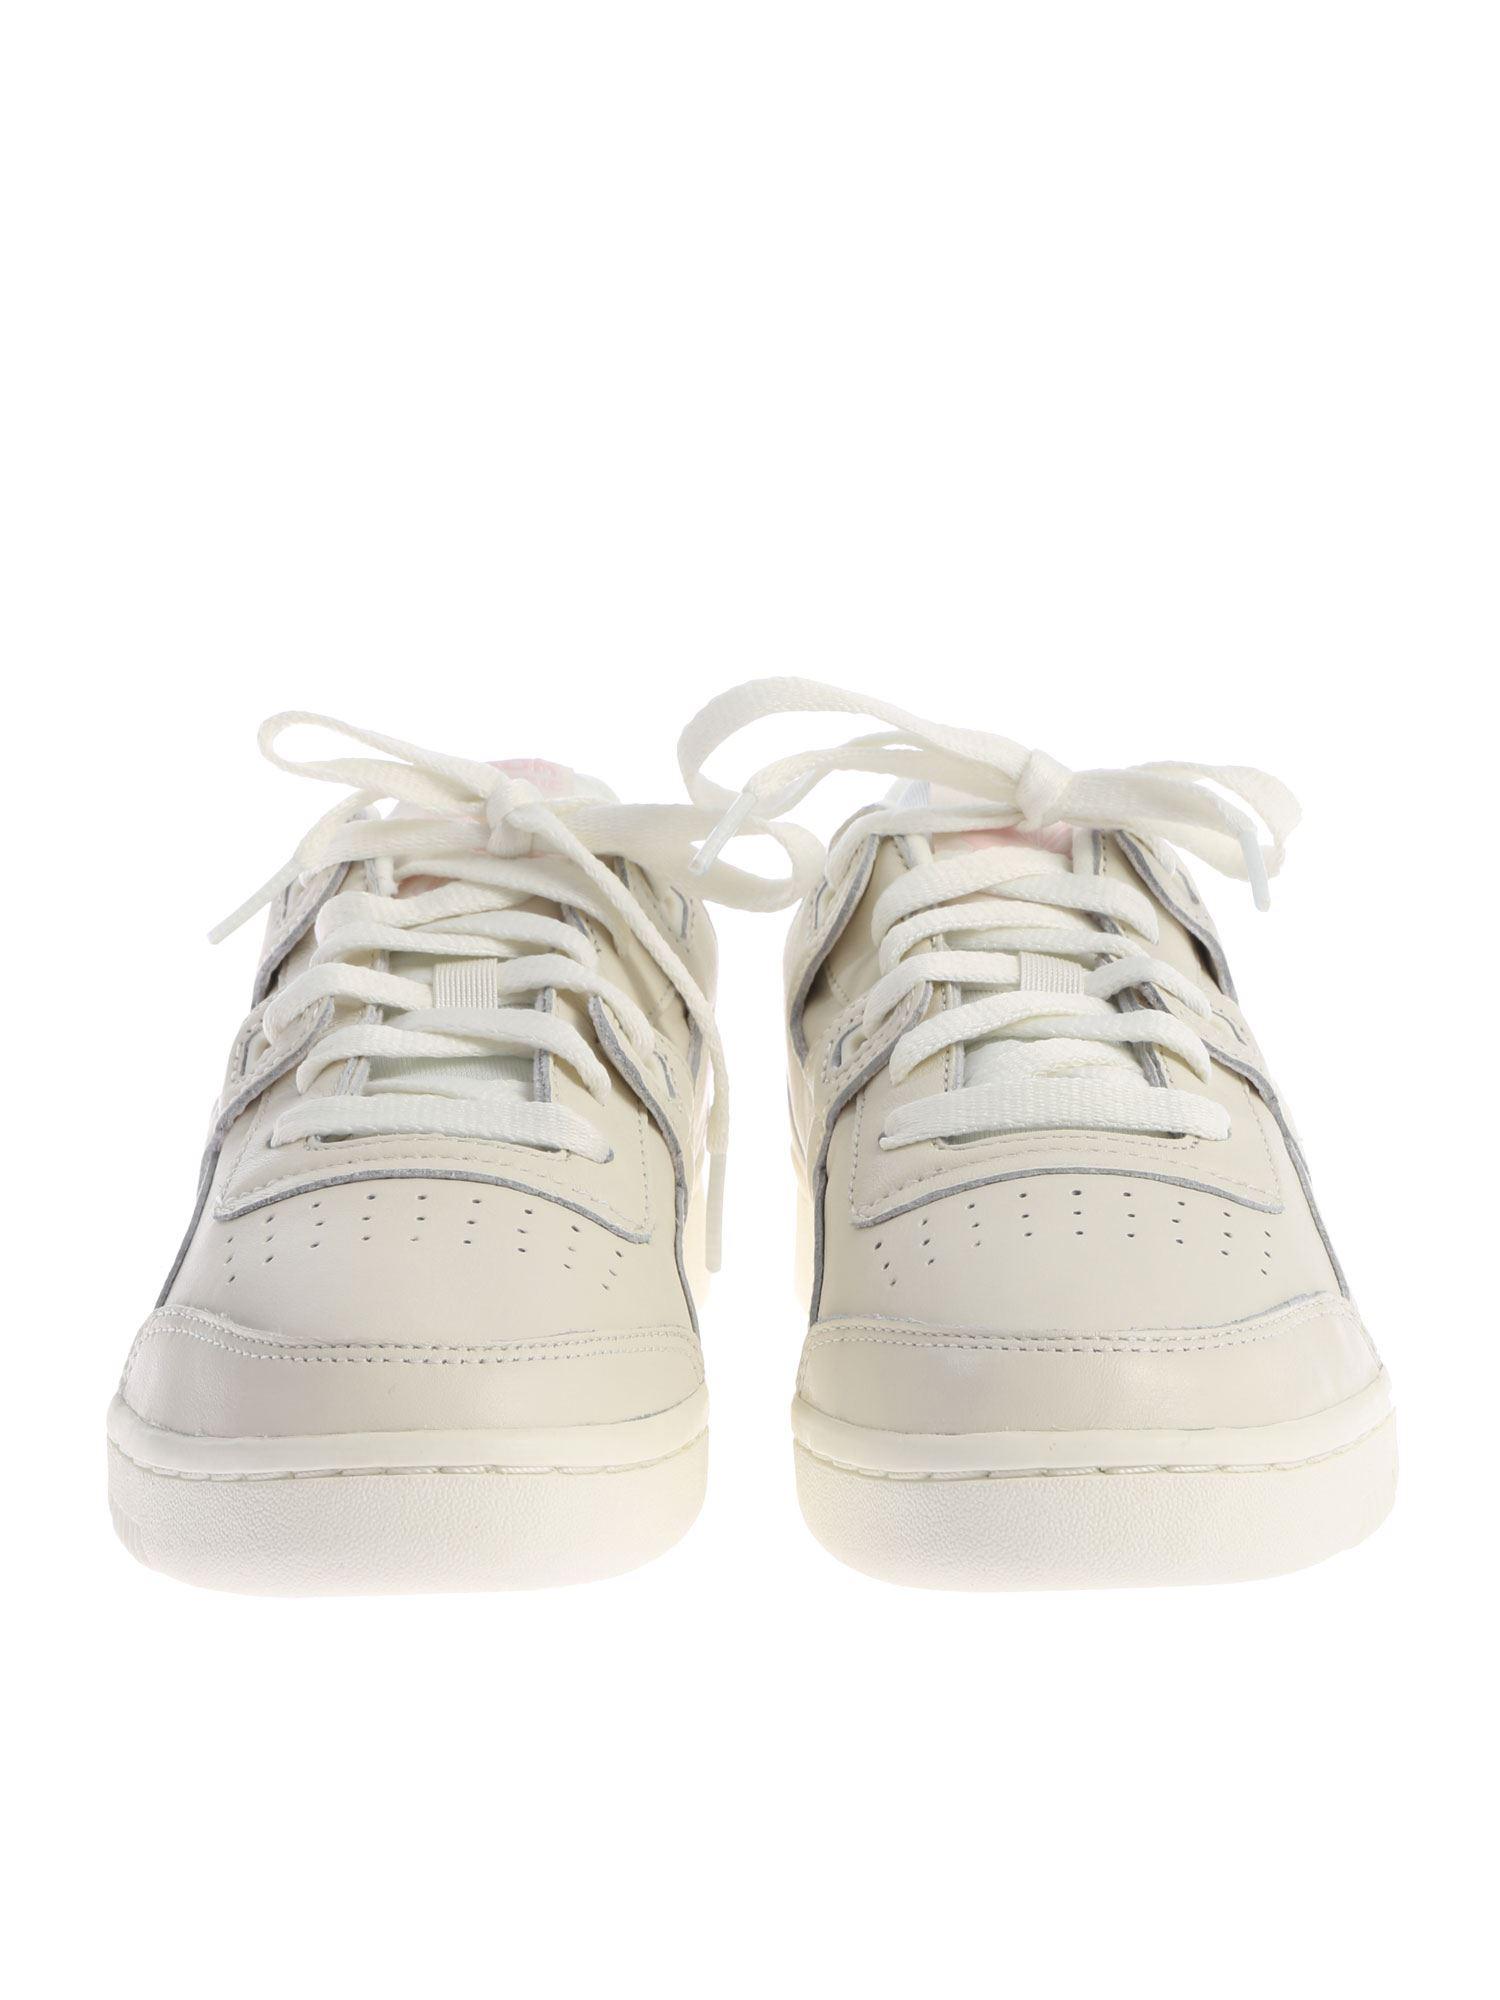 Reebok Leather Creamcolored "workout Lo Plus" Sneakers in